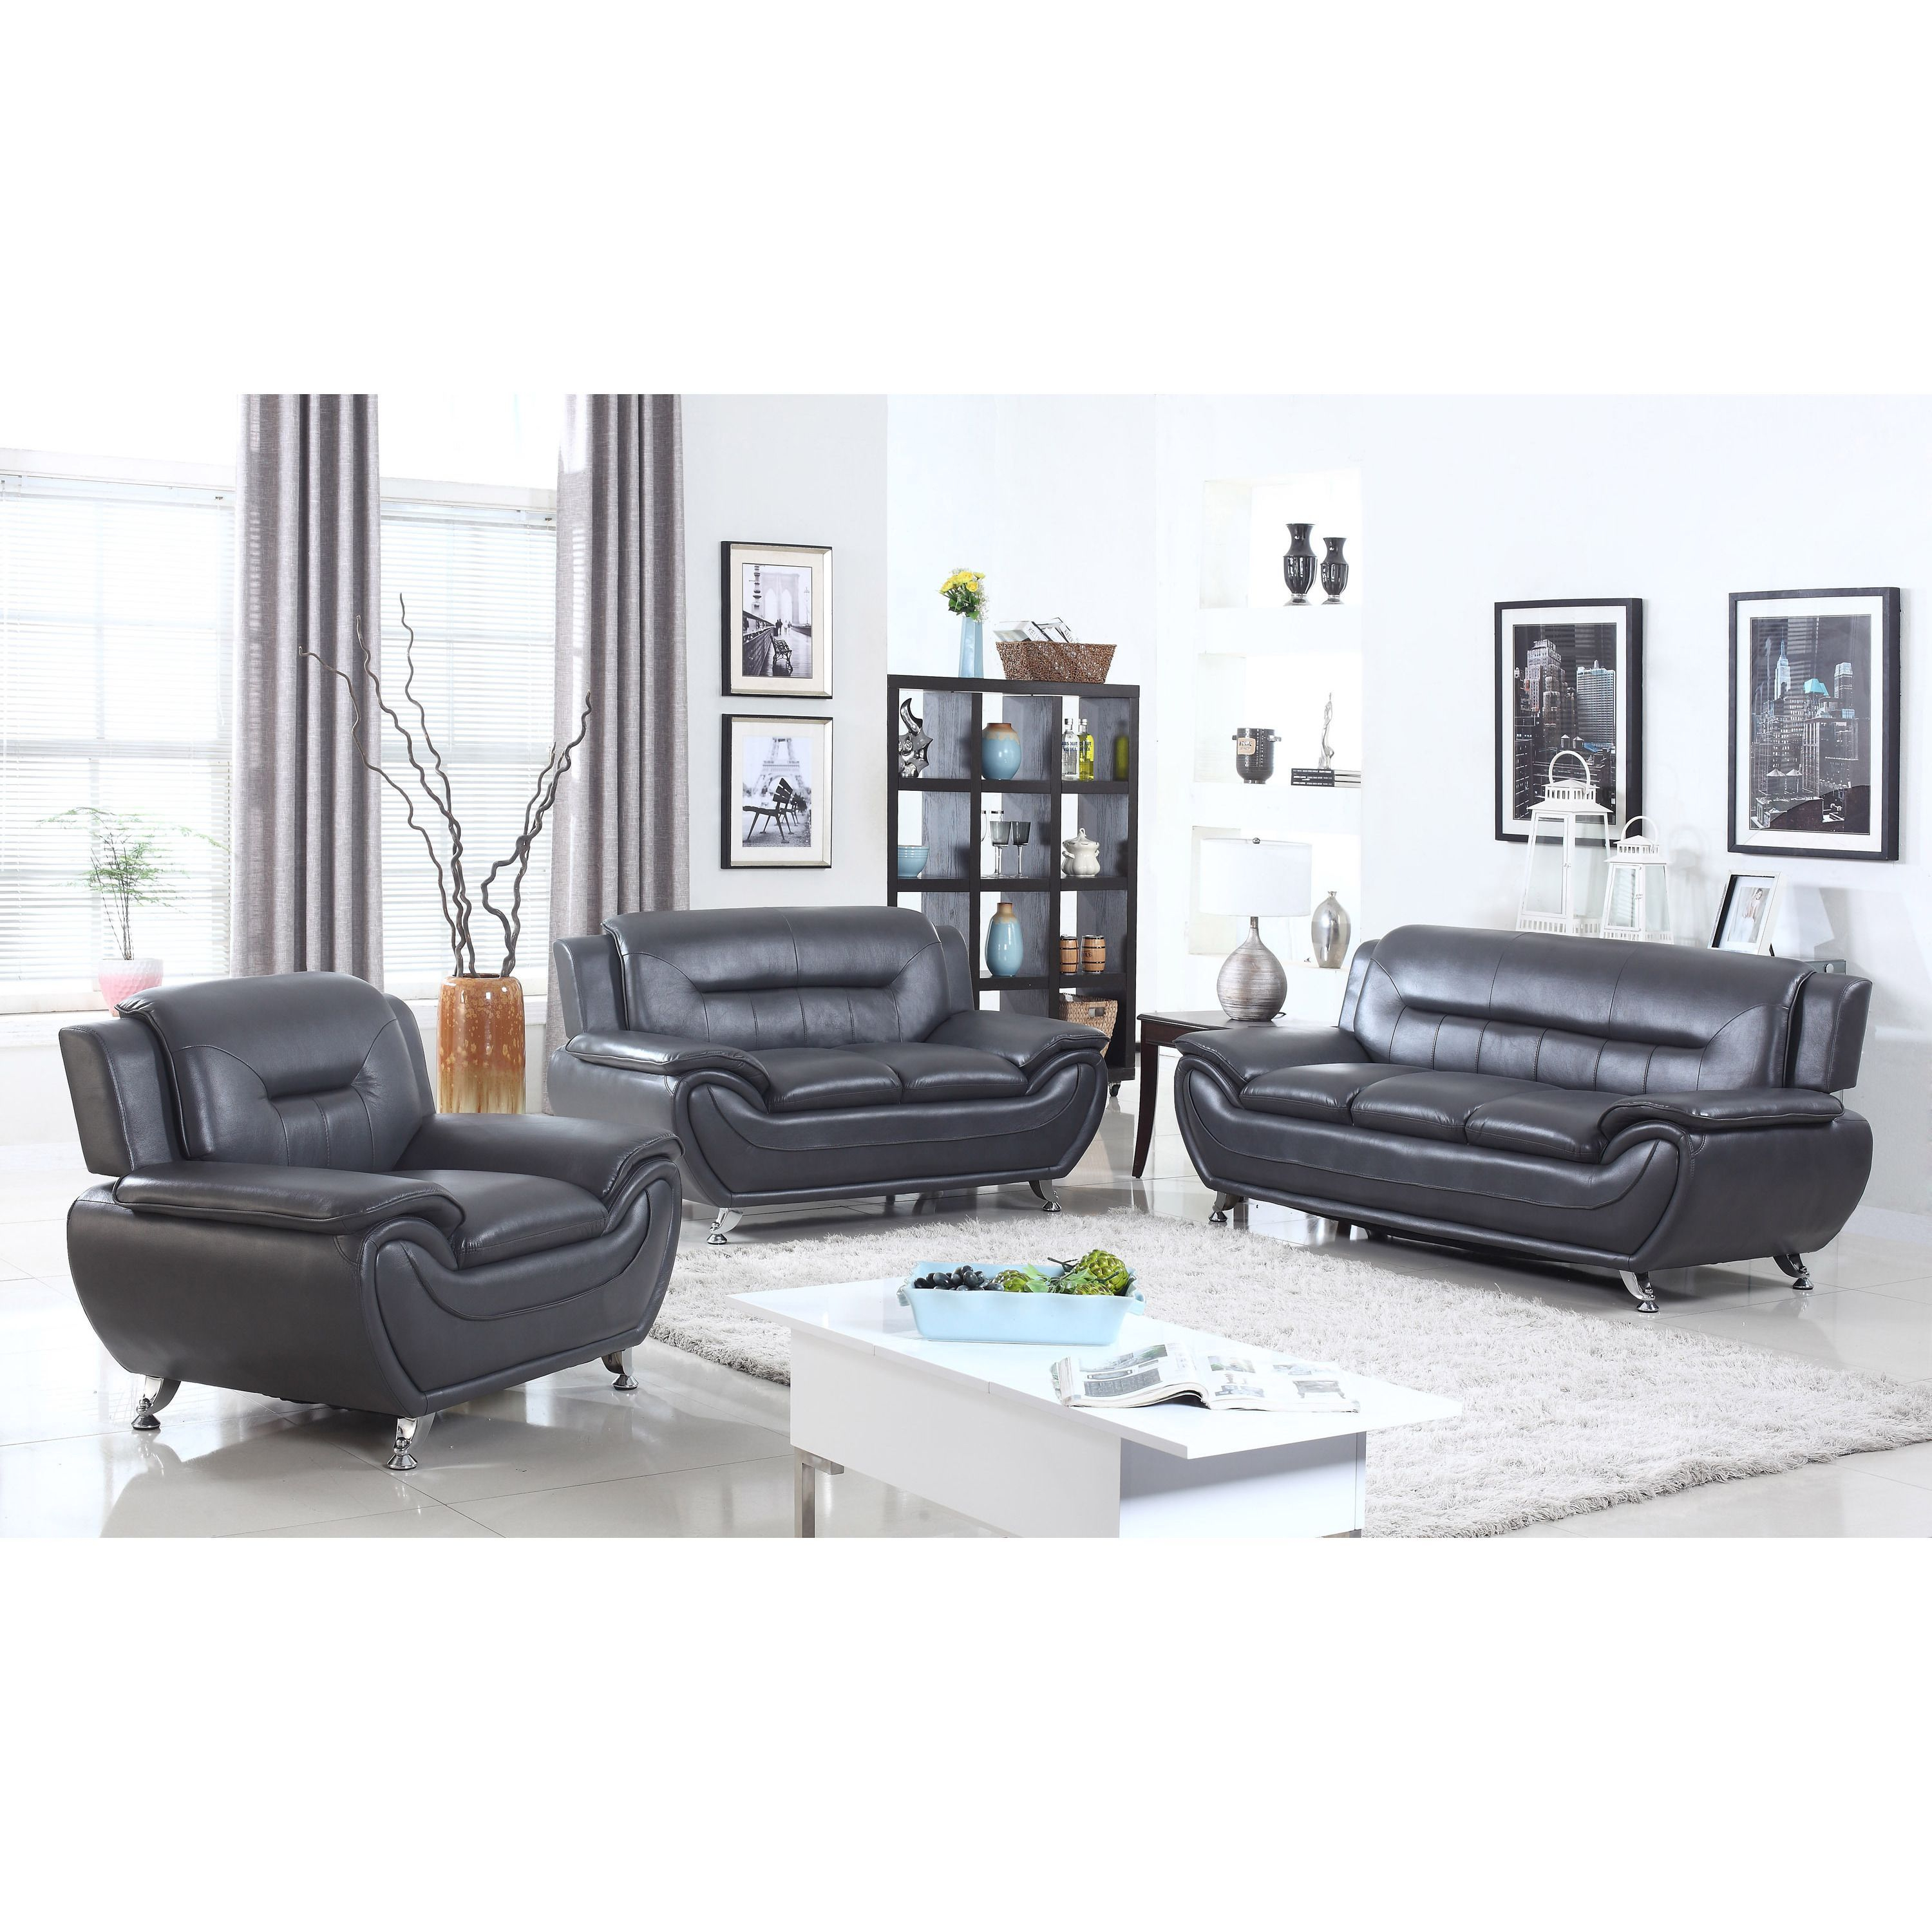 Alice Faux Leather Modern Living Room Set 3 Piece Brown in dimensions 3000 X 3000